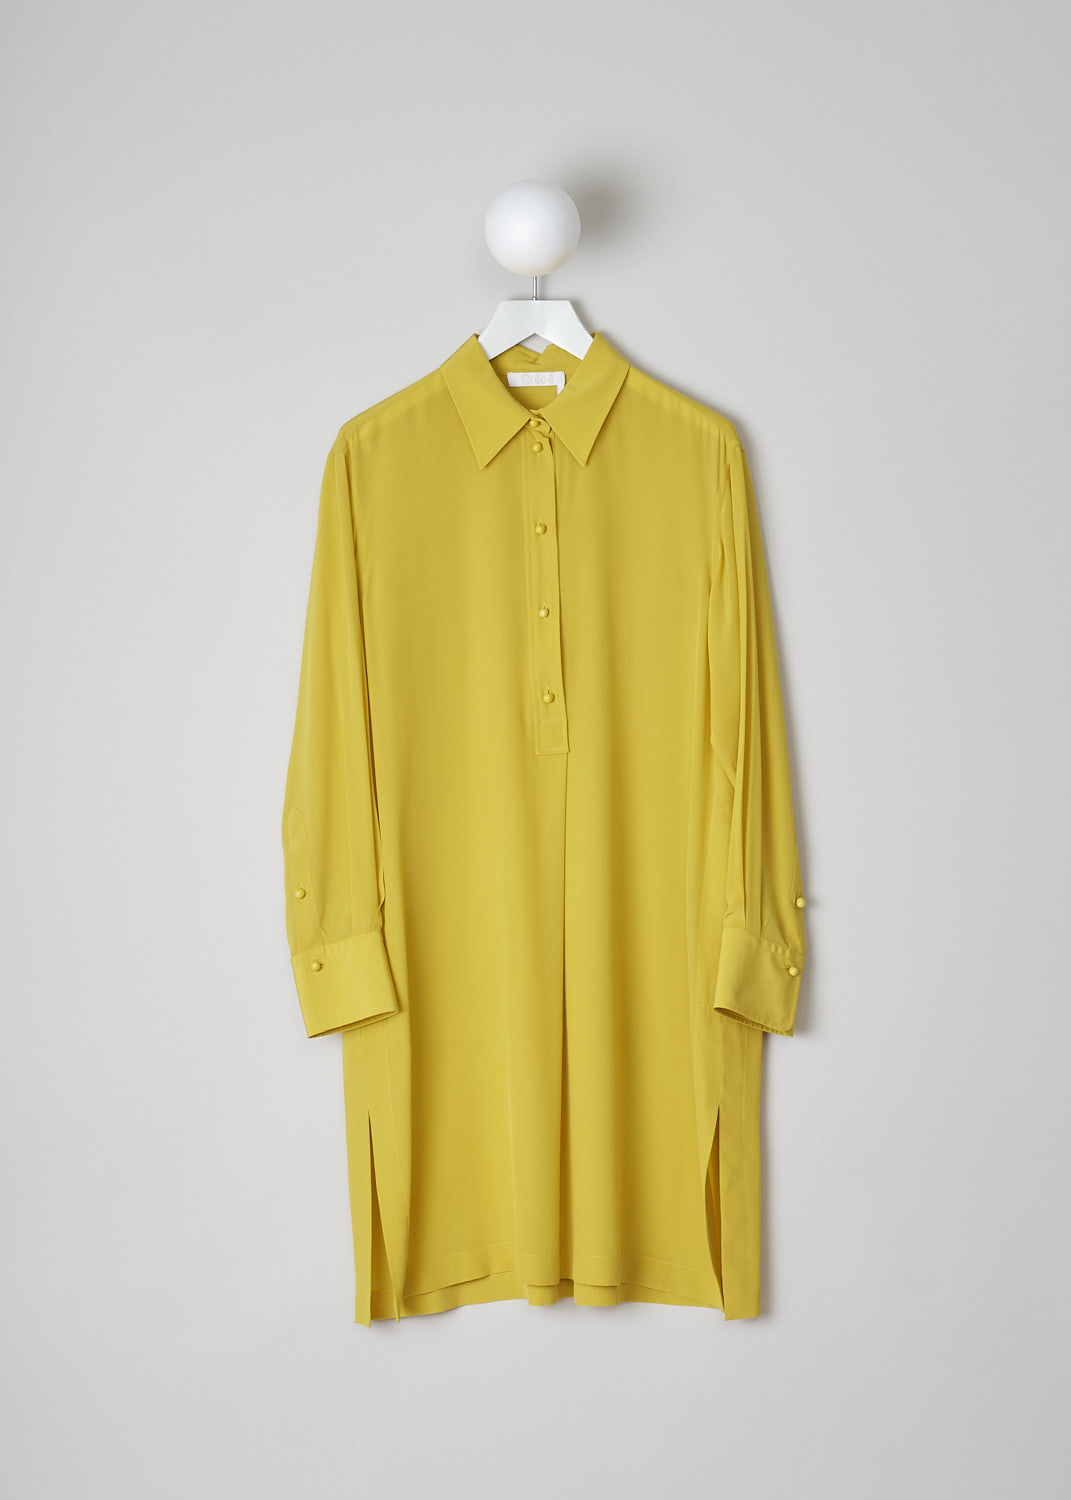 CHLOÃ‰, MUSTARD YELLOW DRESS, CHC22URO64004732_MUSTARD, Yellow, Front, This mustard yellow shirt dress has a spread collar and a front button placket with ceramic buttons that reaches about halfway down. The long sleeves have cuffs with those same ceramic buttons. Slanted pockets are concealed in the side seam. The dress has a straight hemline with side slits. In the back, the dress has a centre box pleat. 
 
